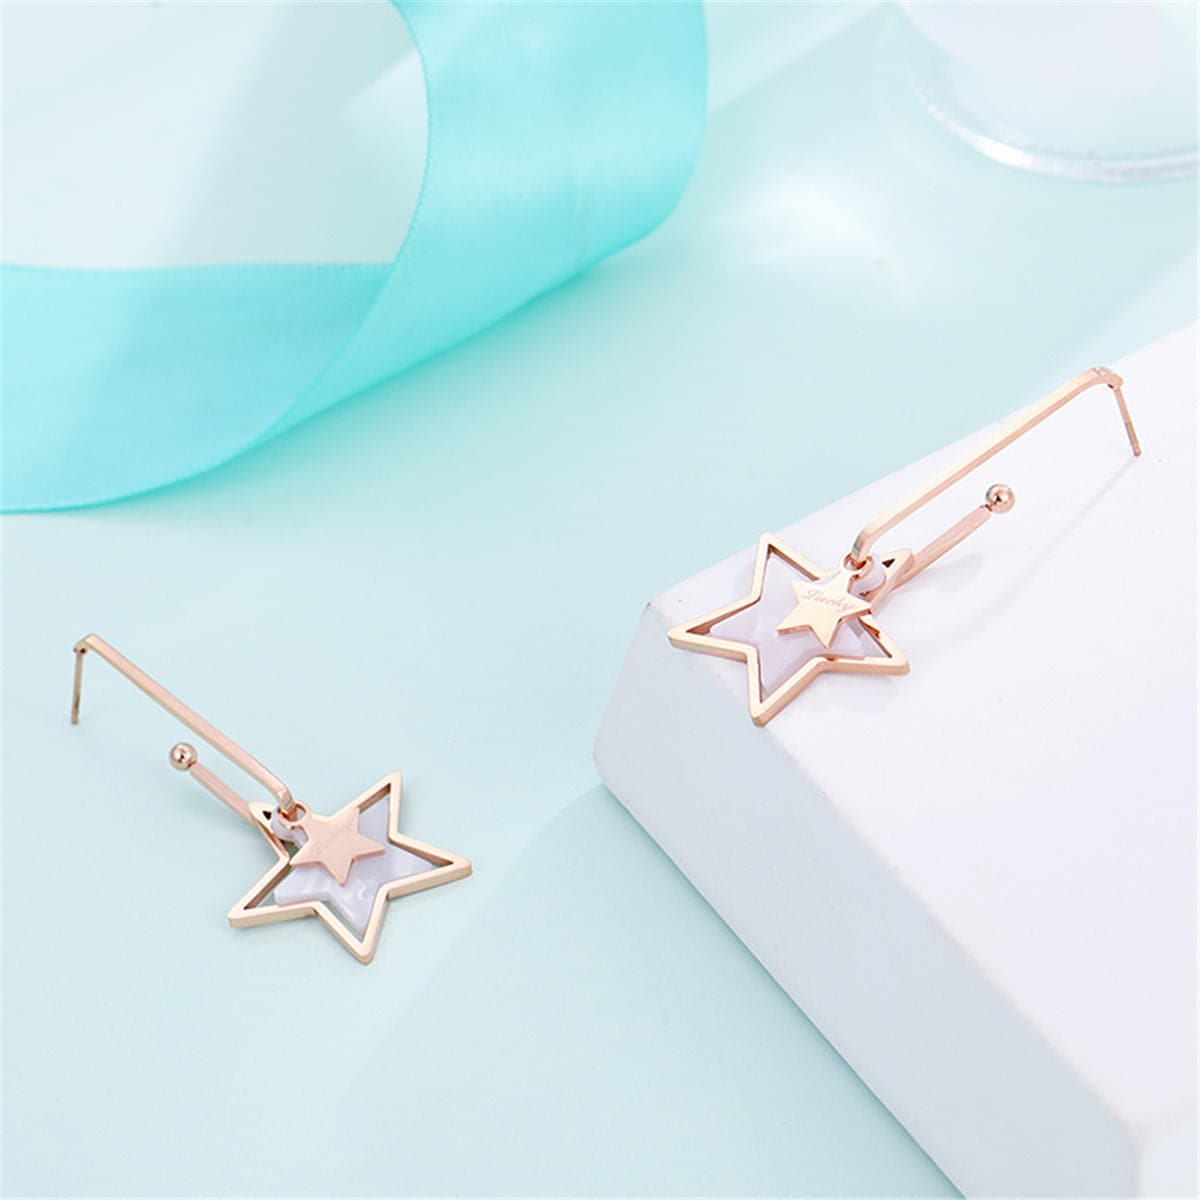 Shell & 18K Rose Gold-Plated 'Lucky' Star Drop Earring